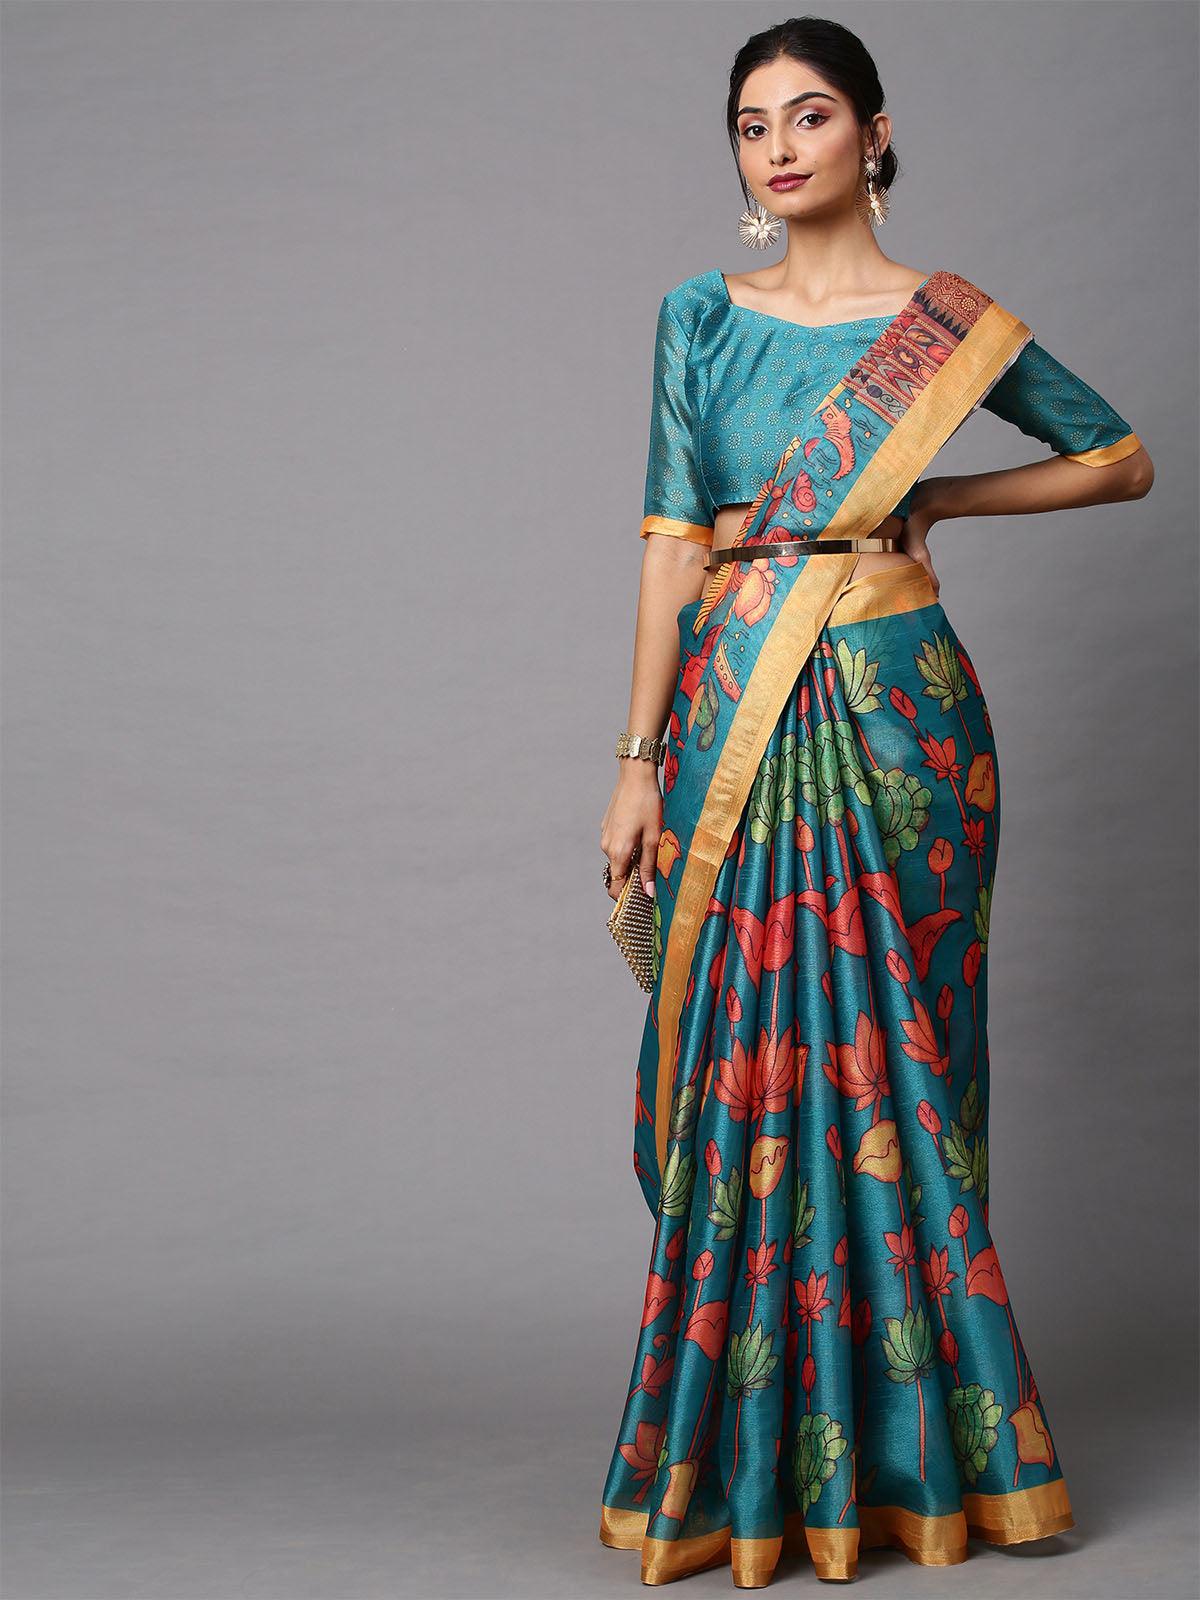 Women's Cotton Linen Teal Blue Printed Celebrity Saree With Blouse Piece - Odette